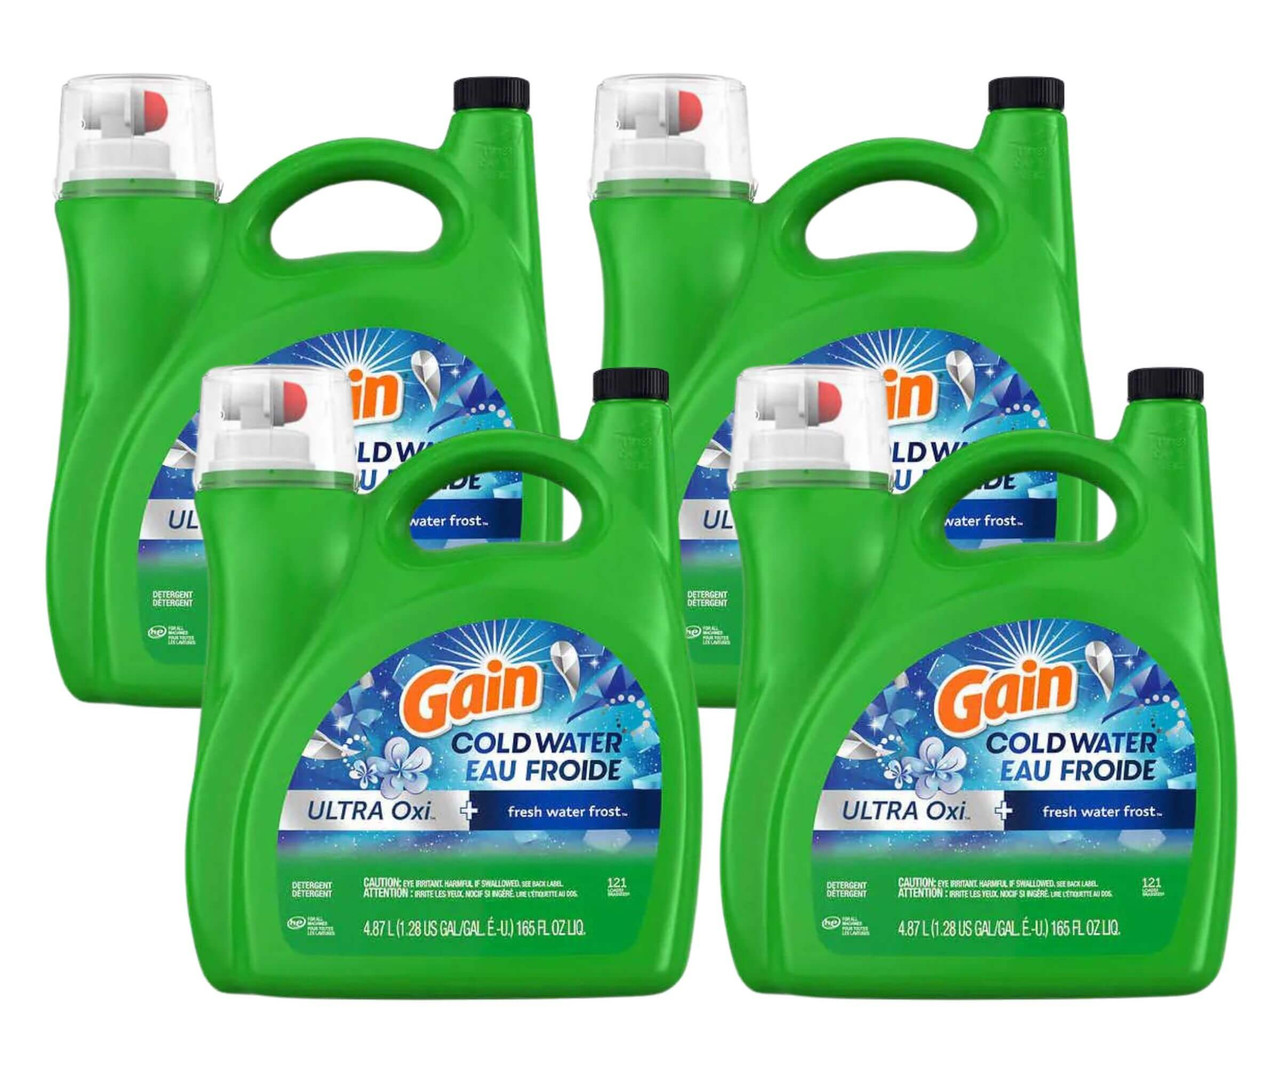 Gain Liquid High Efficiency Cold Water + Oxi Fresh Water Frost  4.87 L, 121 Loads(4/Case)-Chicken Pieces